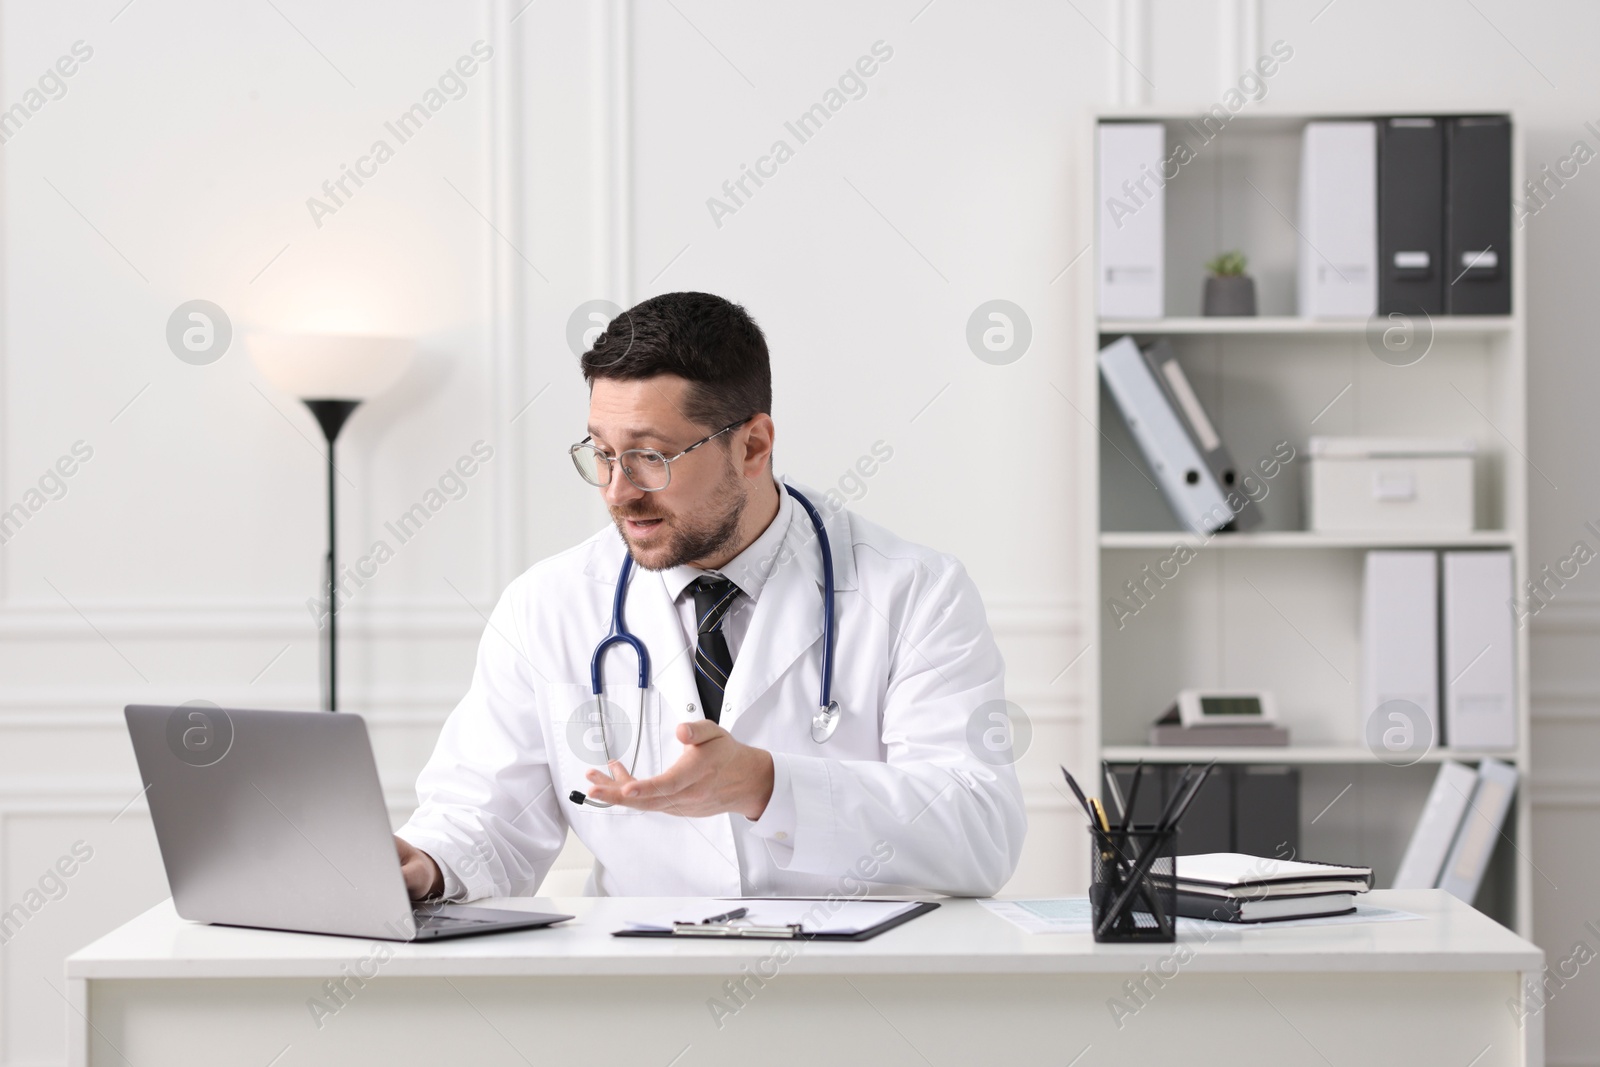 Photo of Doctor having online consultation via laptop at table in clinic